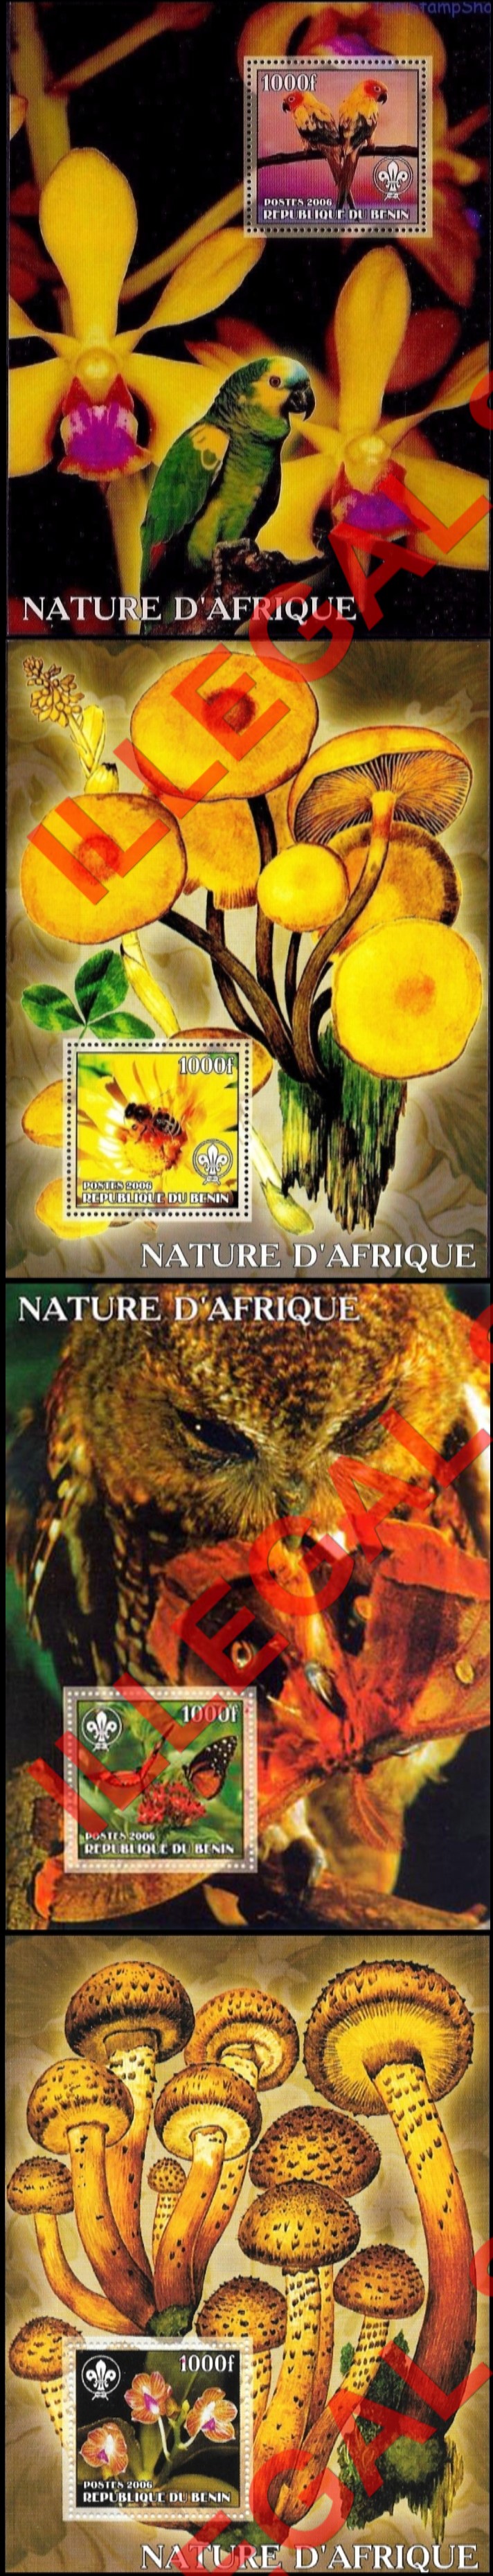 Benin 2006 Nature of Africa Illegal Stamp Souvenir Sheets of 1 (Part 1)